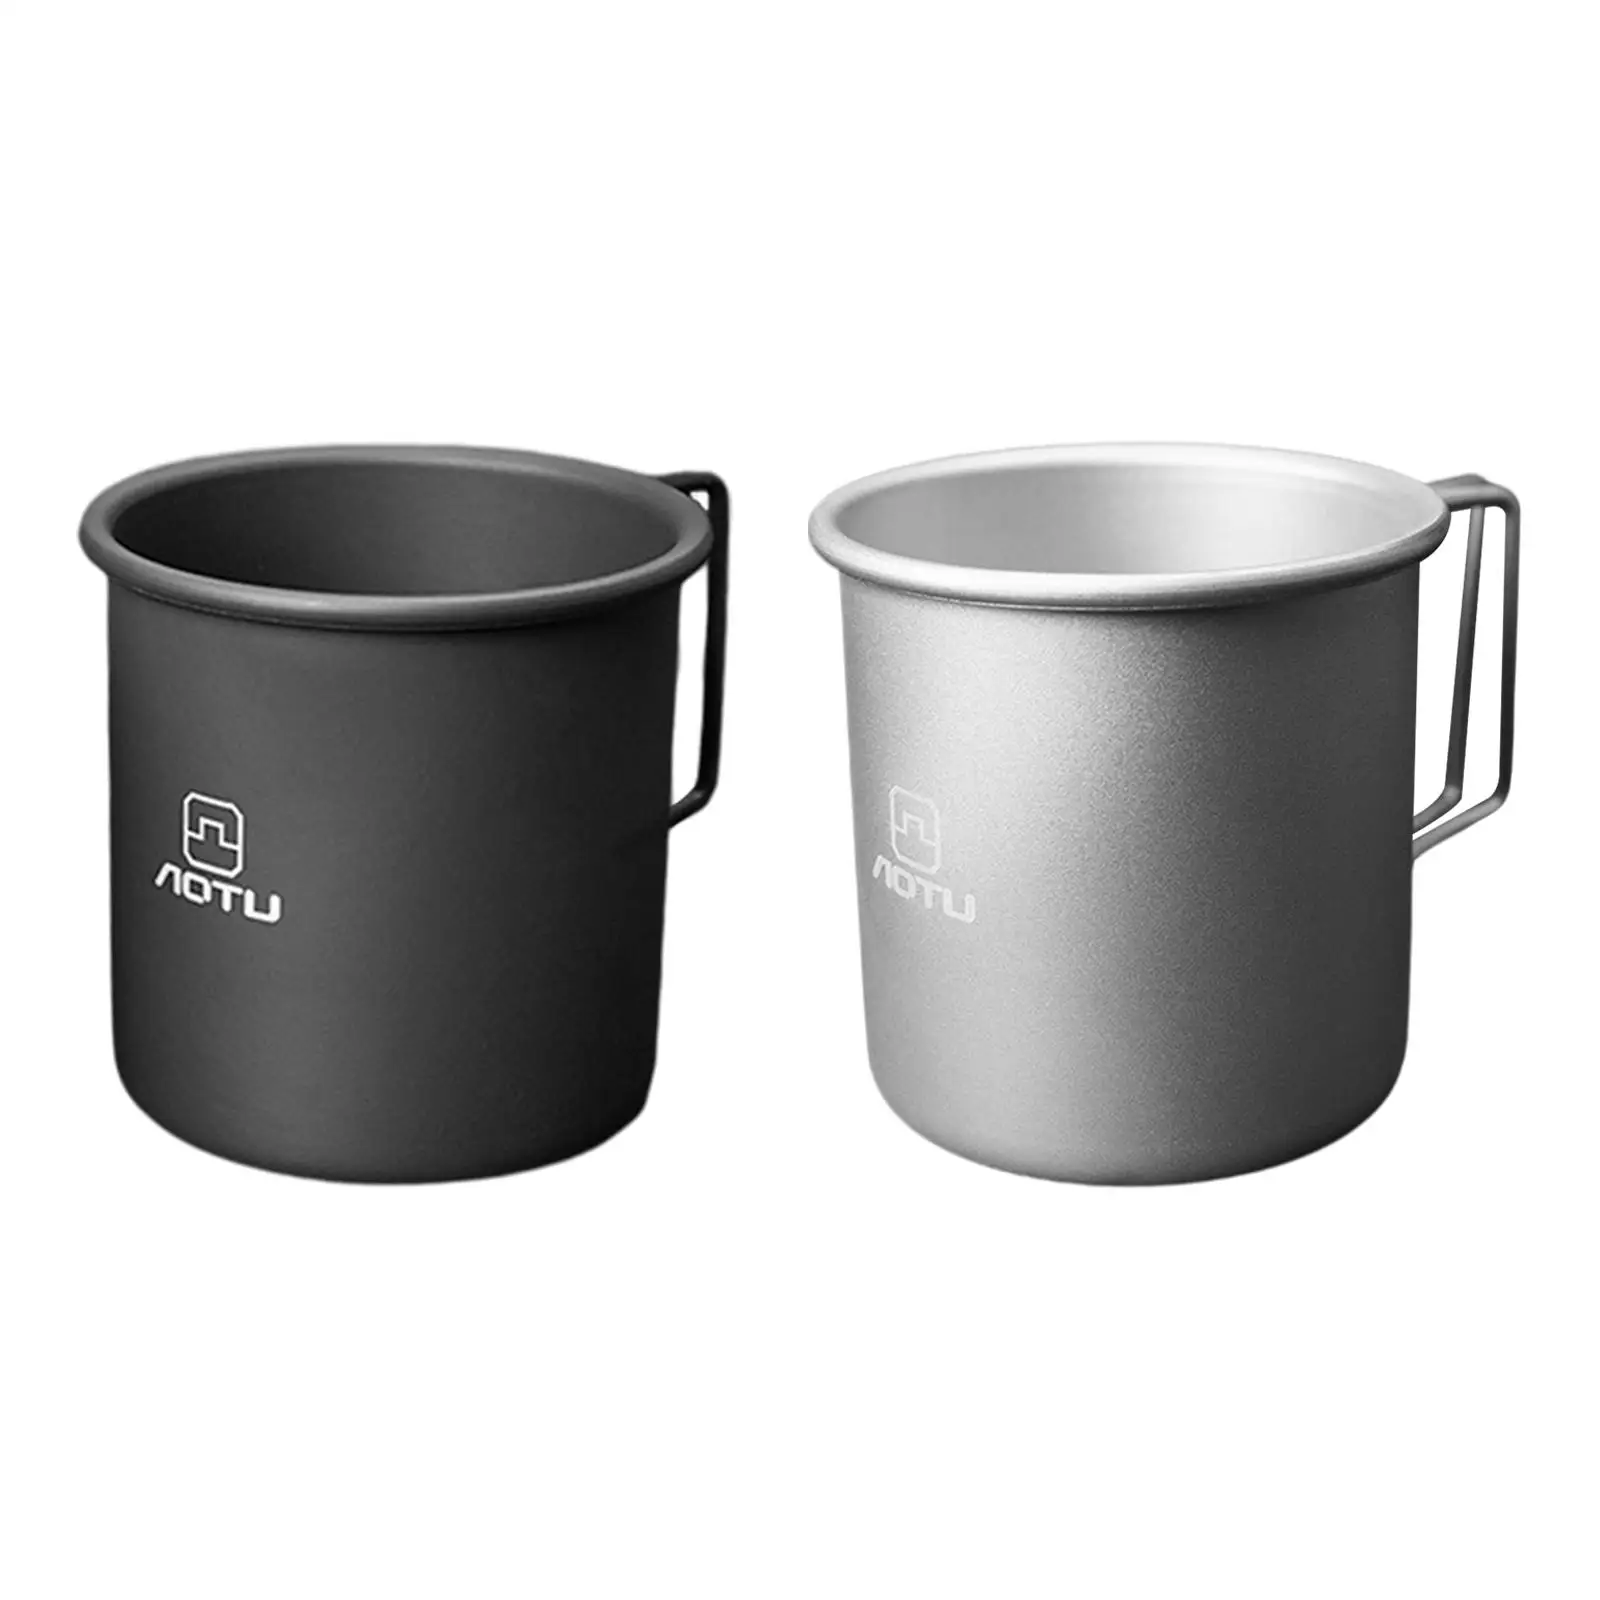 Outdoor Camping Cup Coffee Mug Folding Handle Tableware Lightweight 300ml Water Cup for Hiking Picnic Fishing Hunting Survival